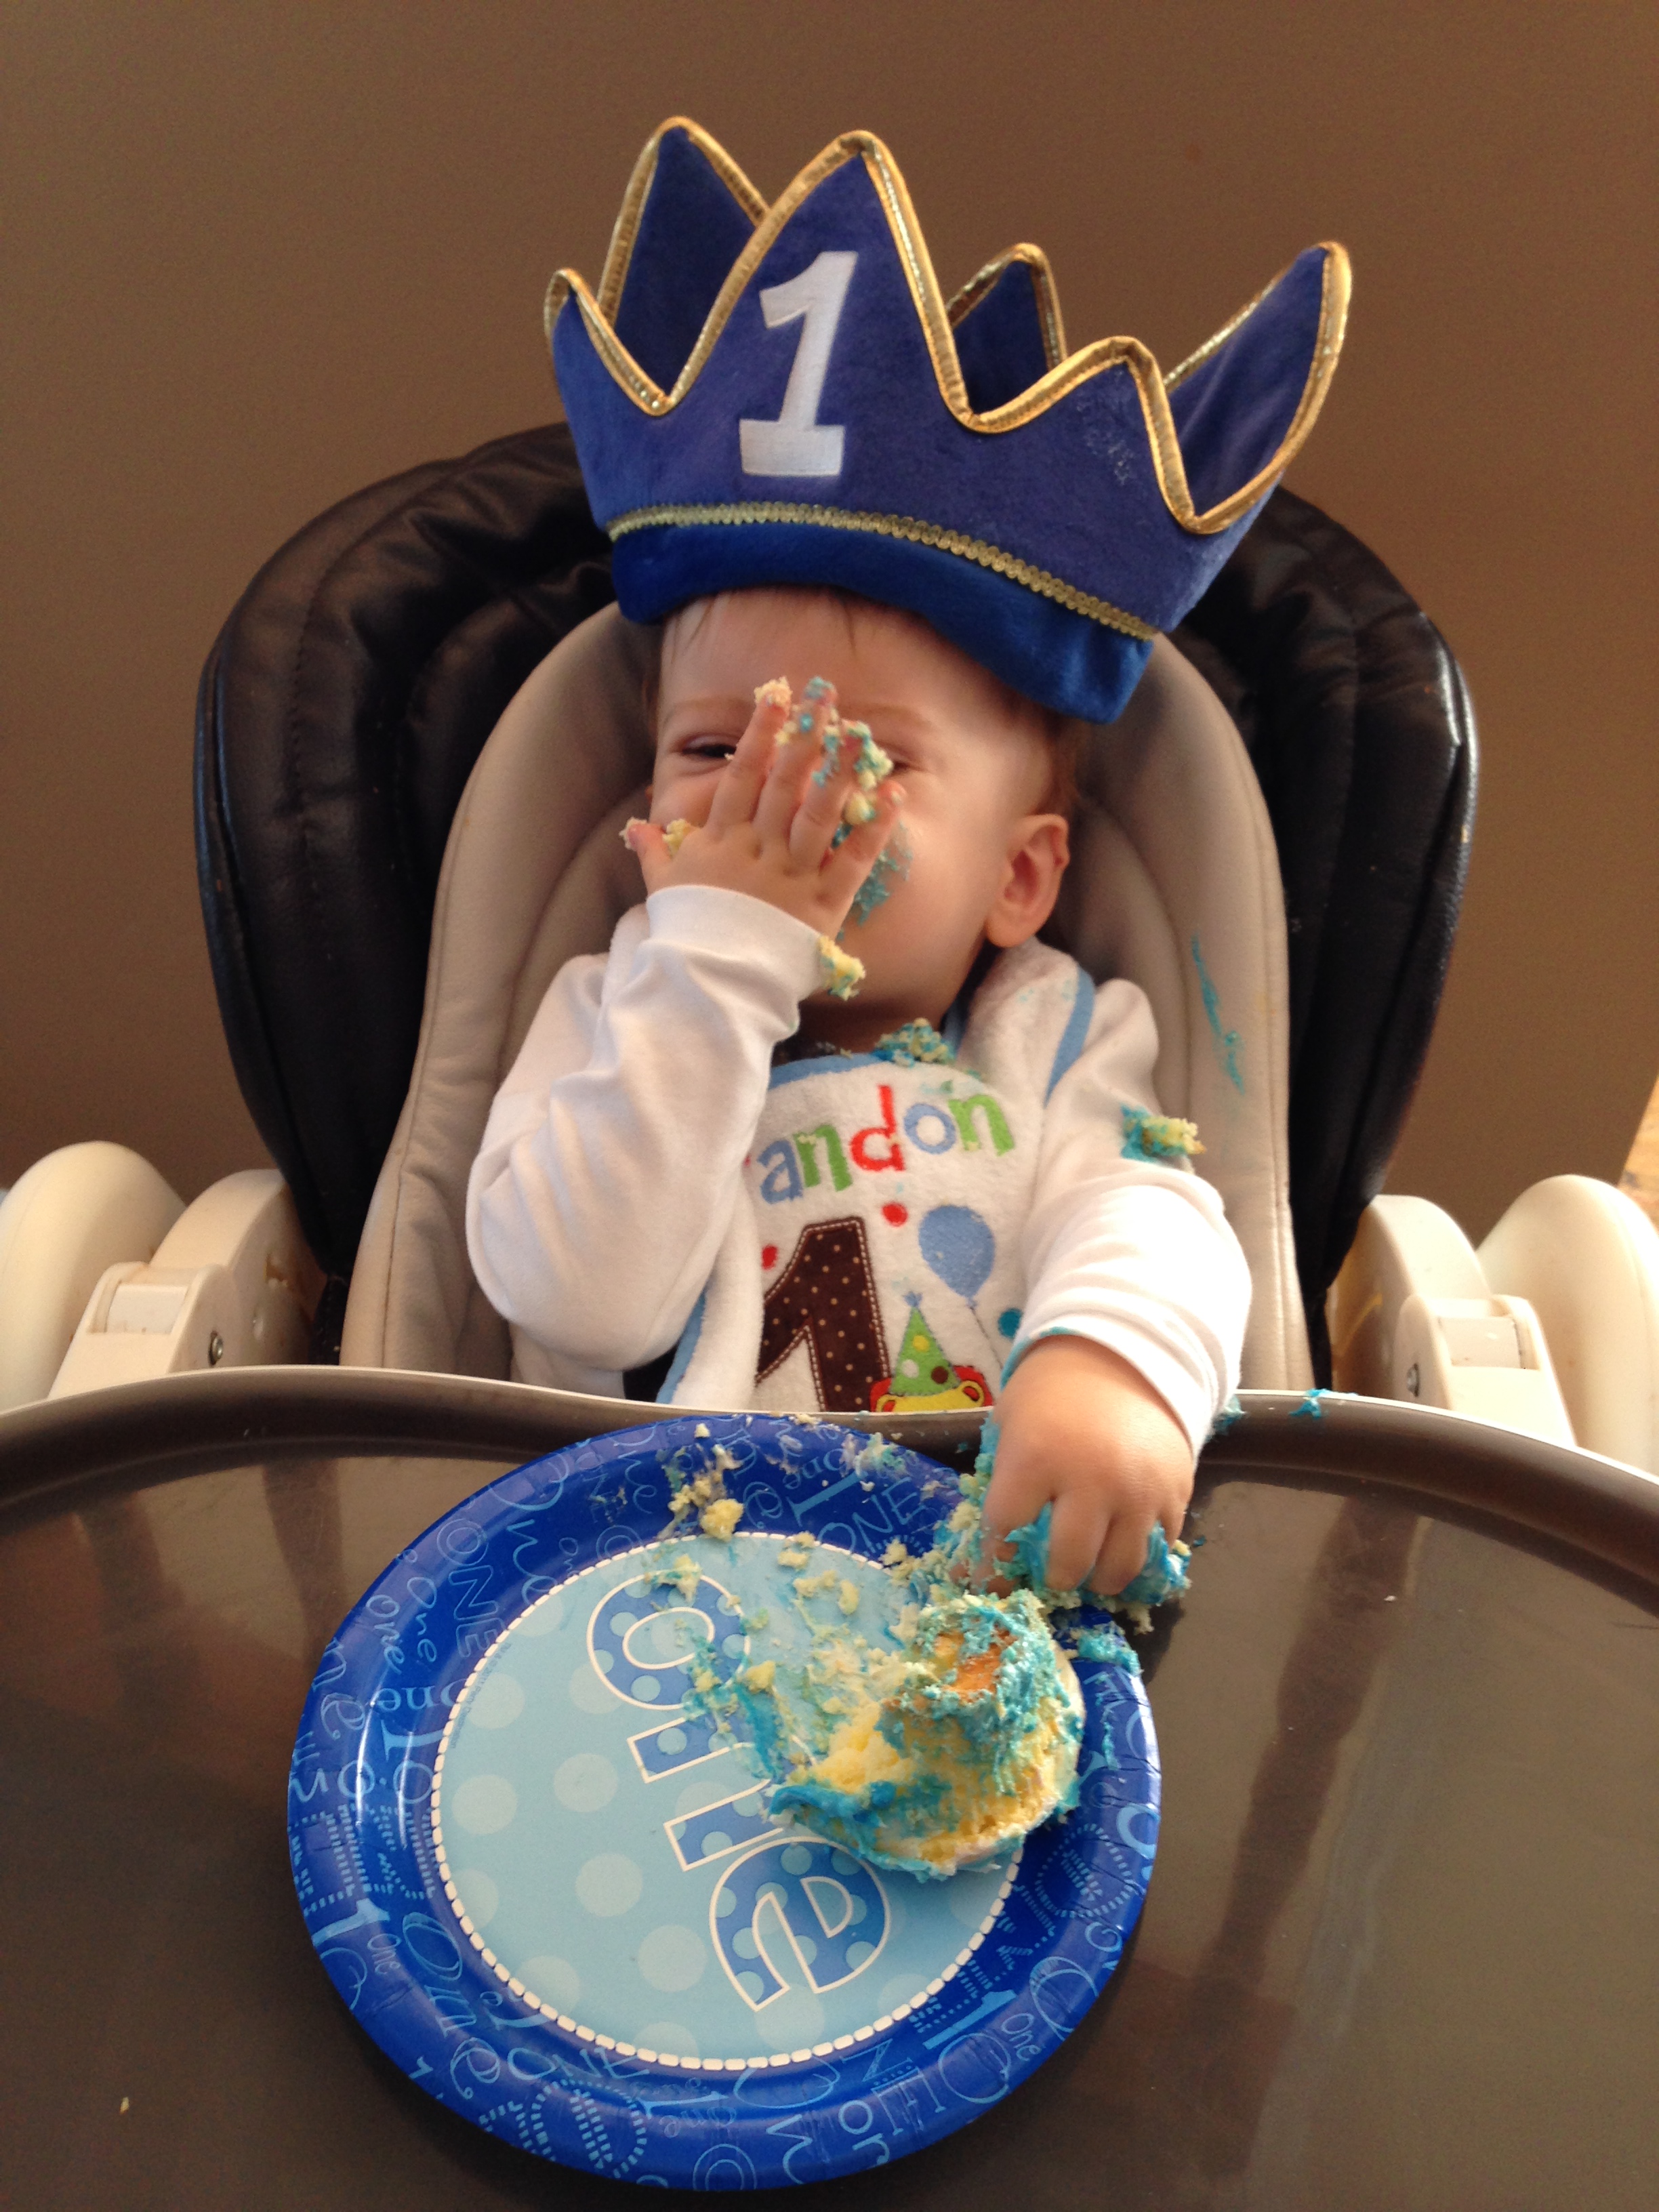 Though I don't believe in the cake smash at weddings, it does feel apropos for 1st birthday parties. 